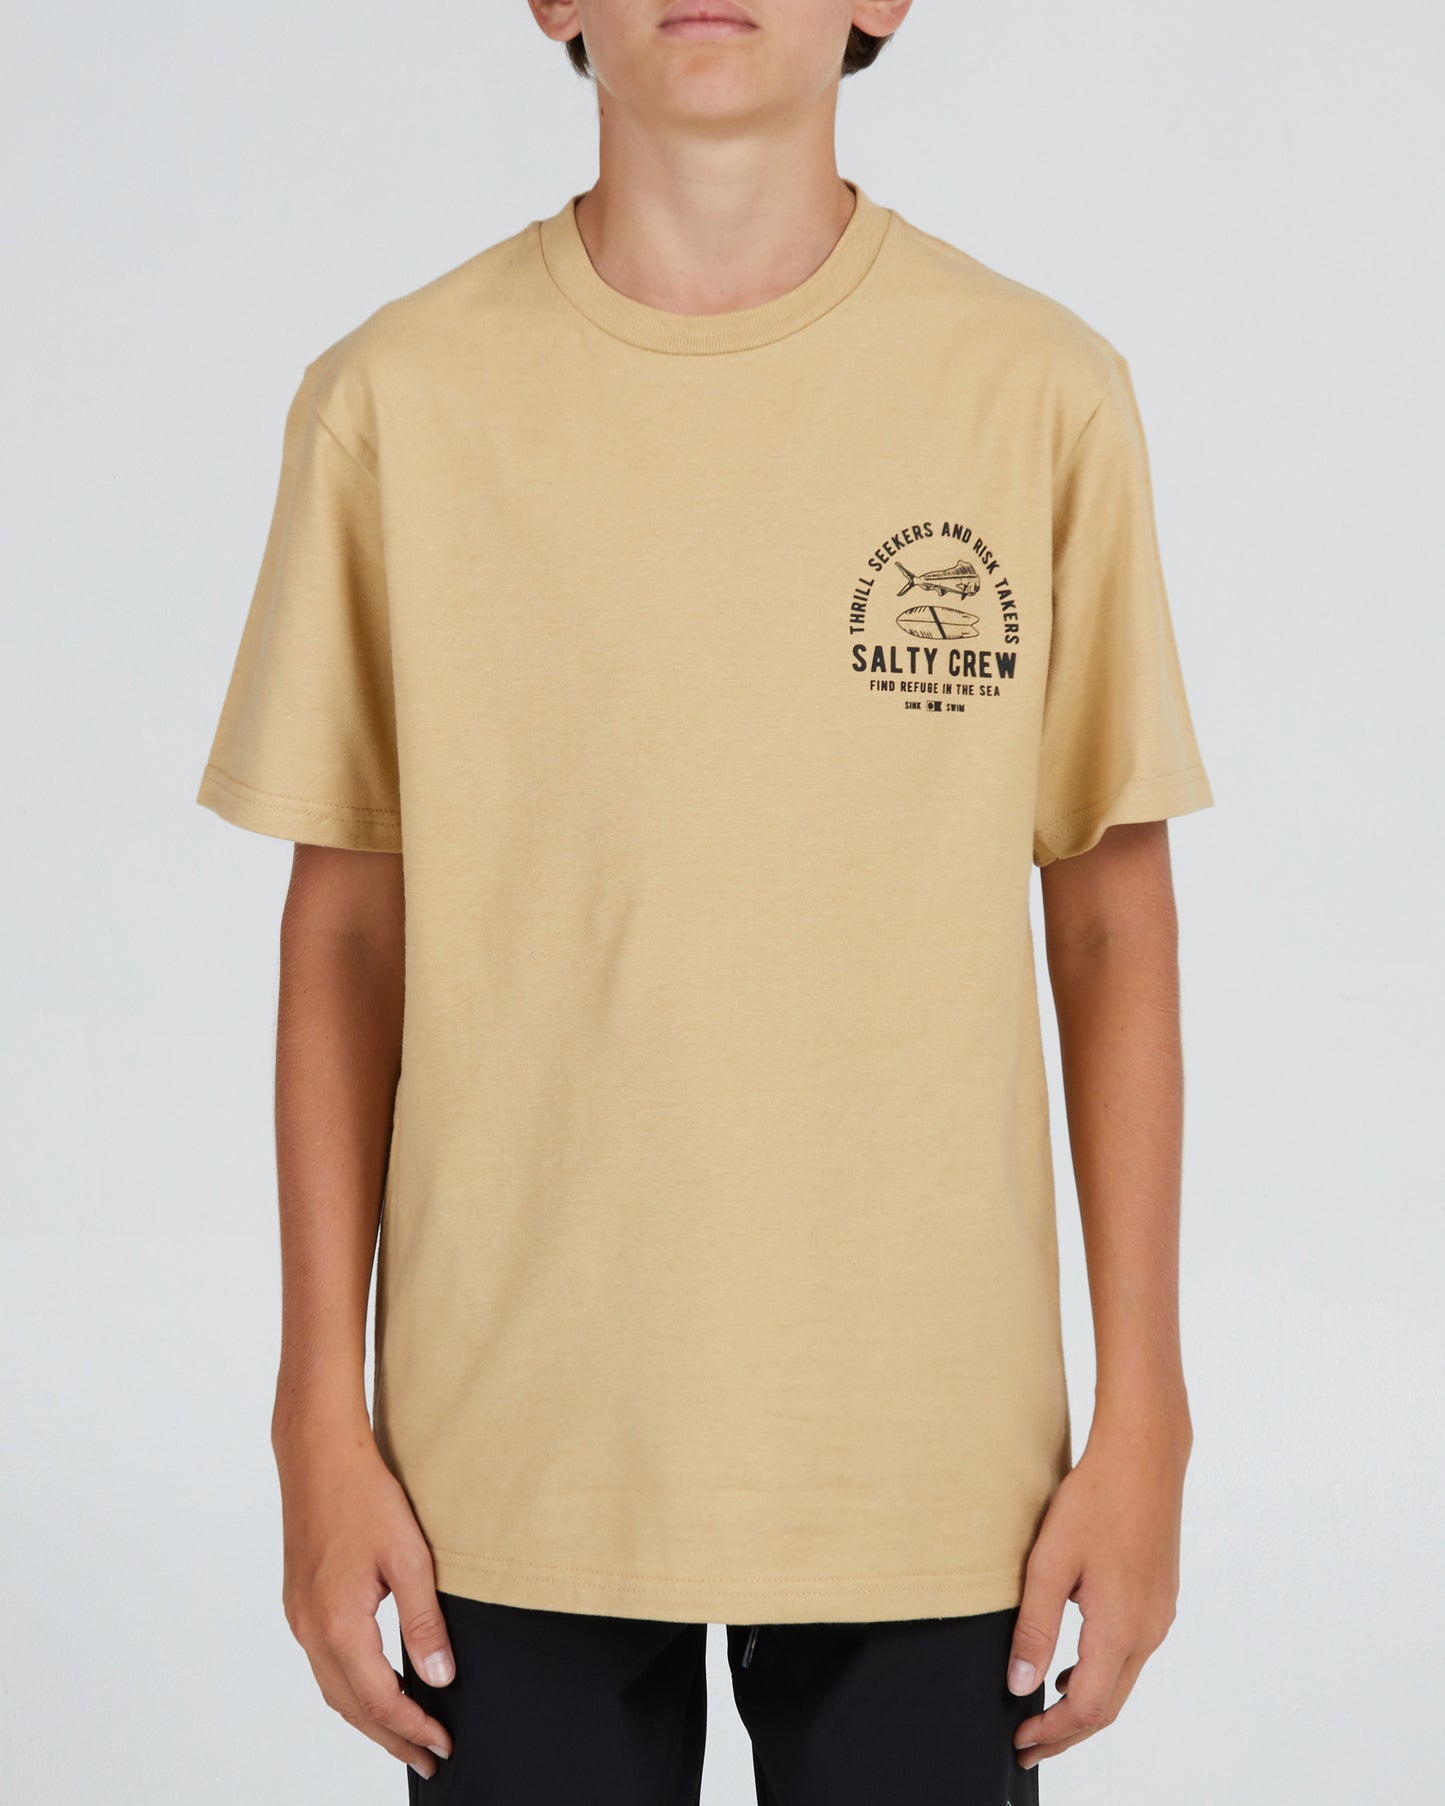 On body front of the Lateral Line Boy Camel S/S Tee